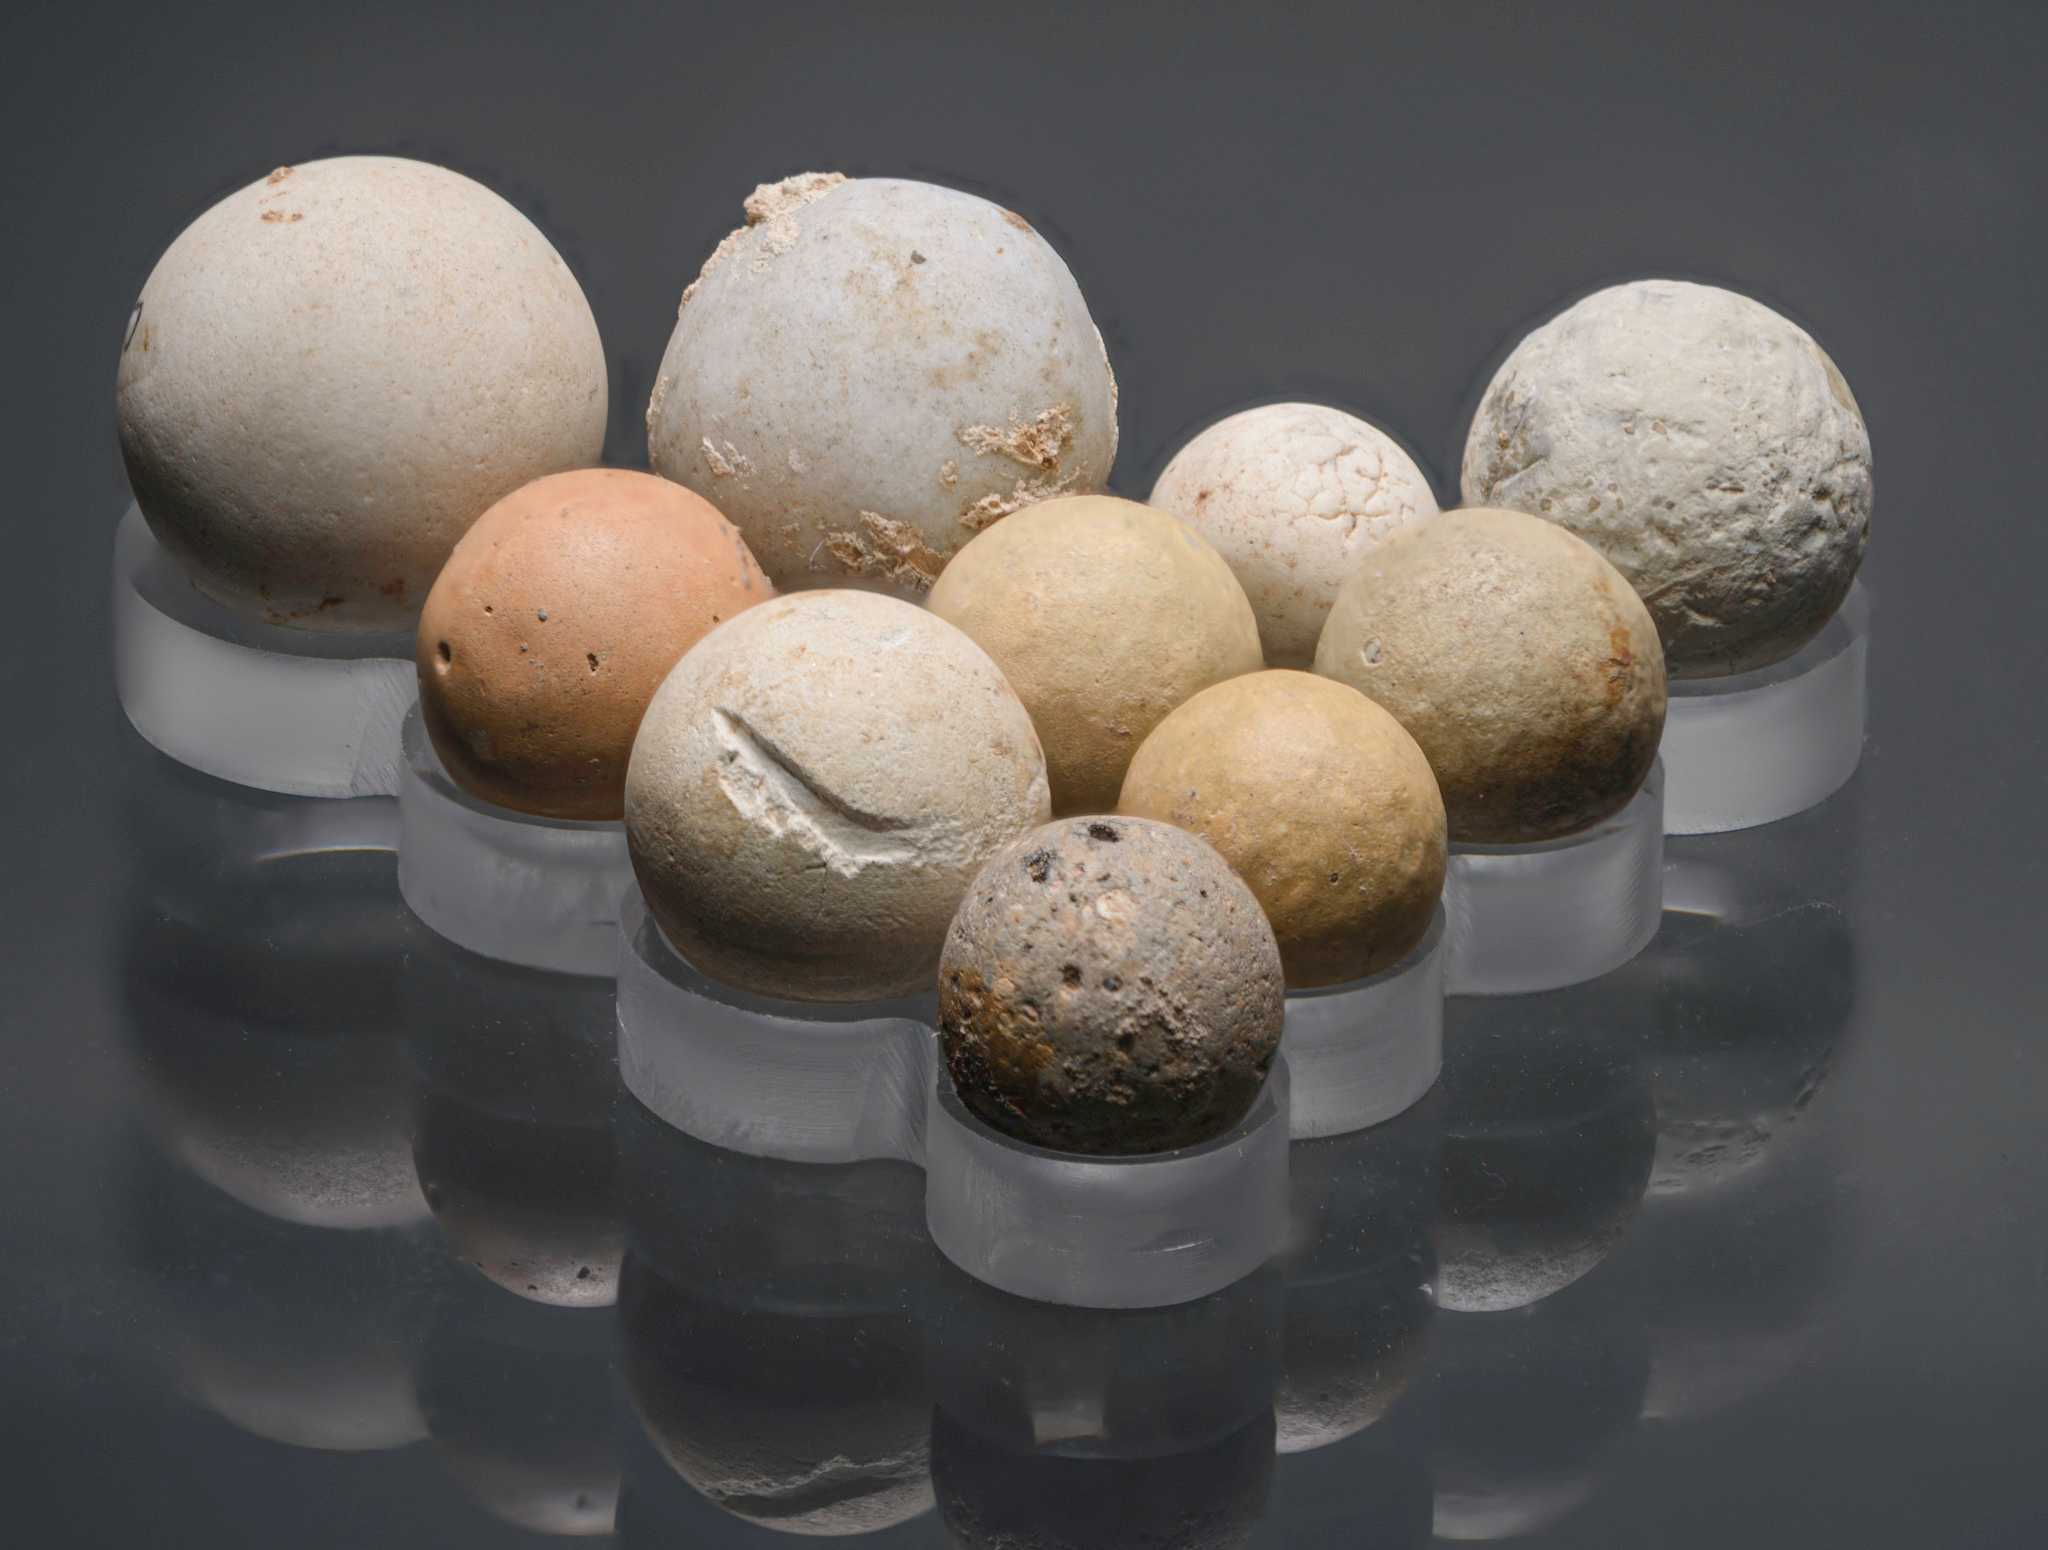 Photograph of ten marbles